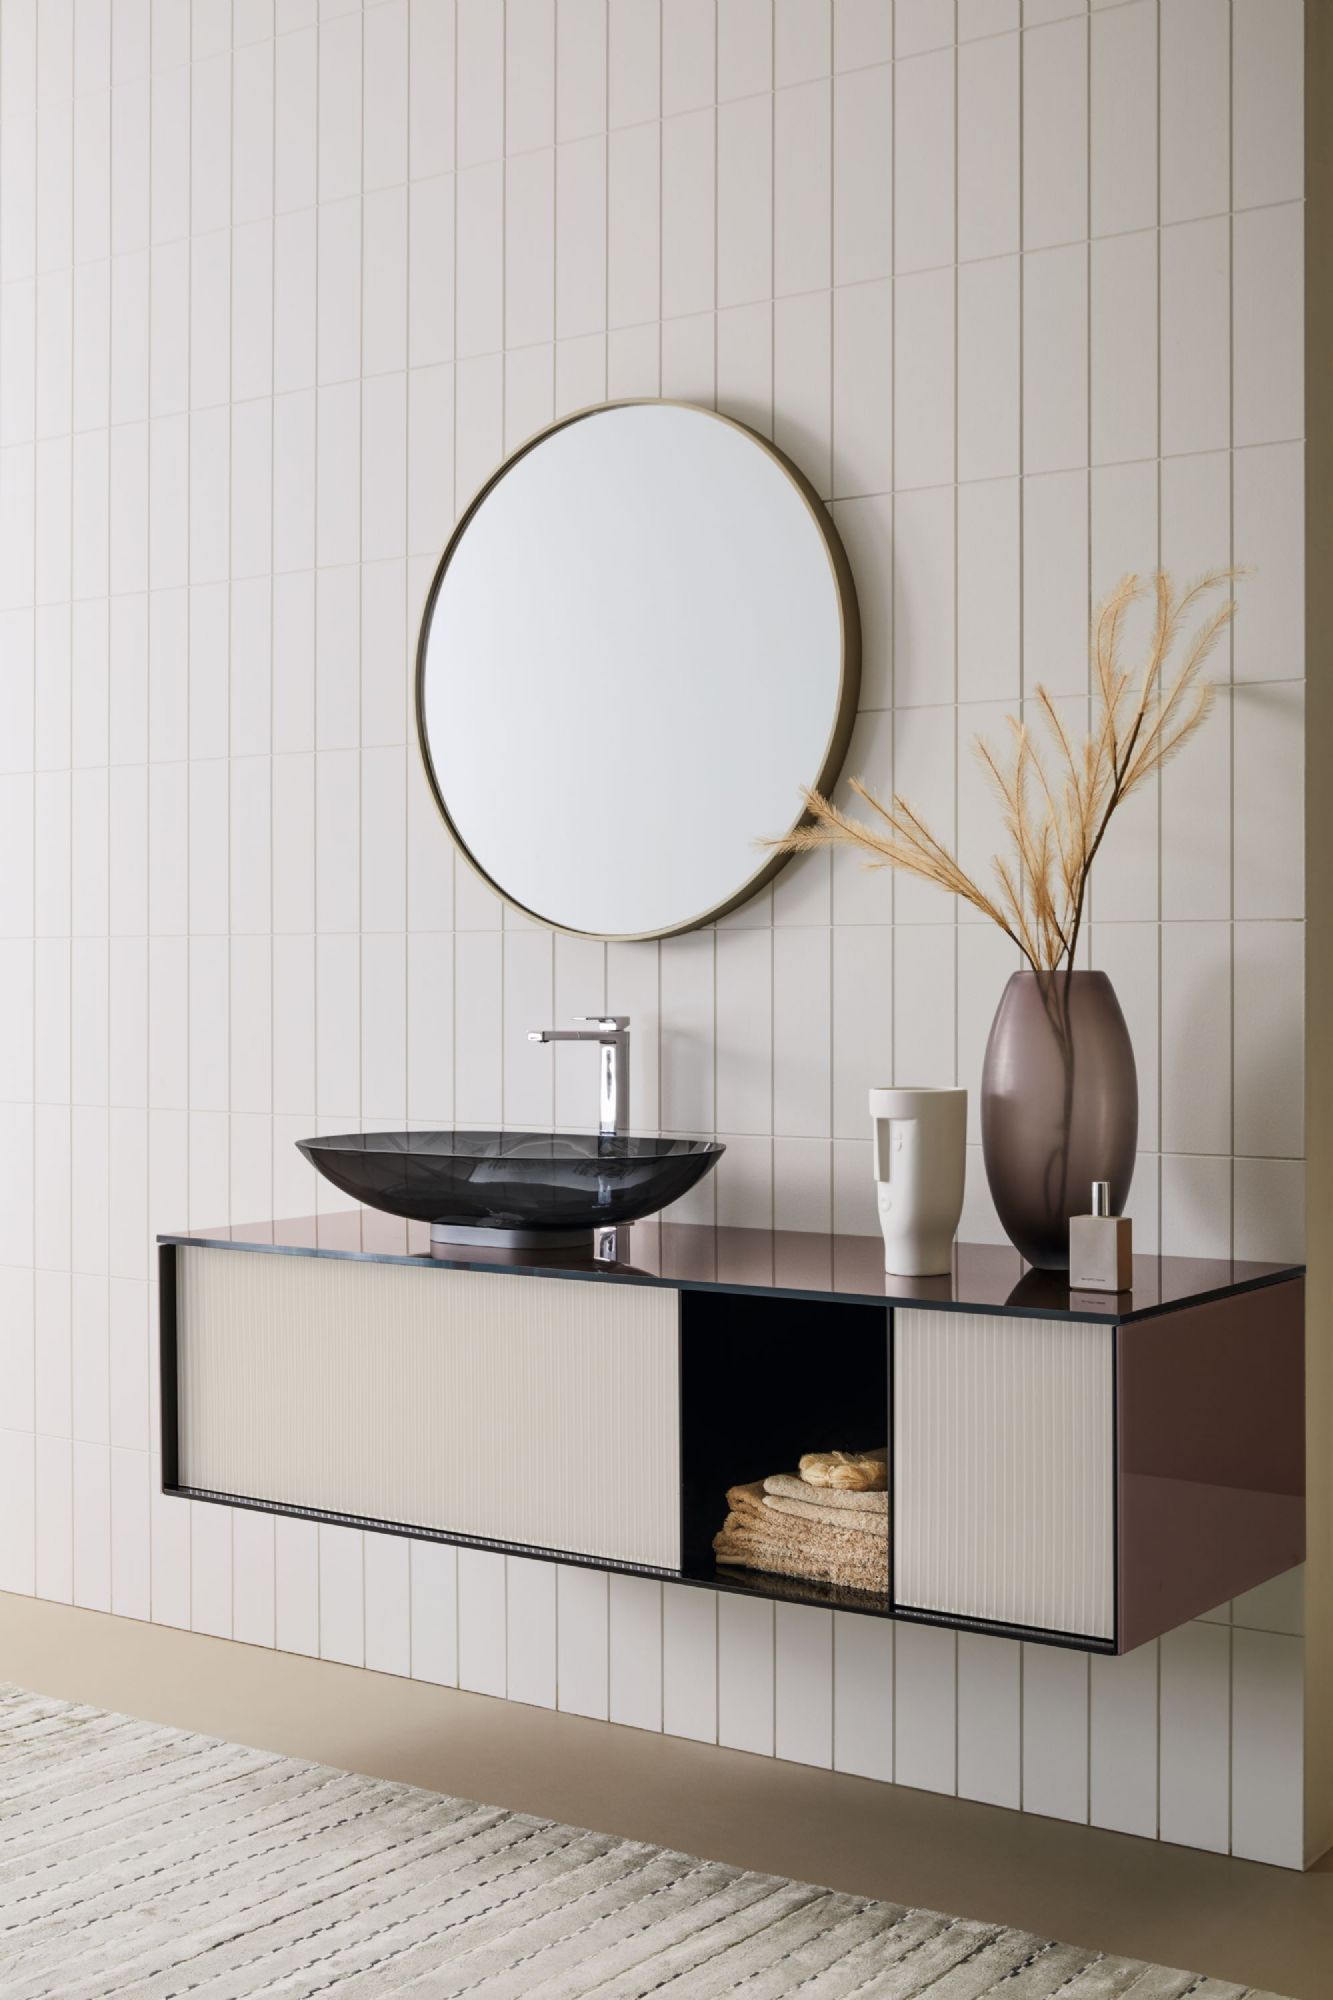 Quadra wall-hung vanity unit with fluted glass finish.